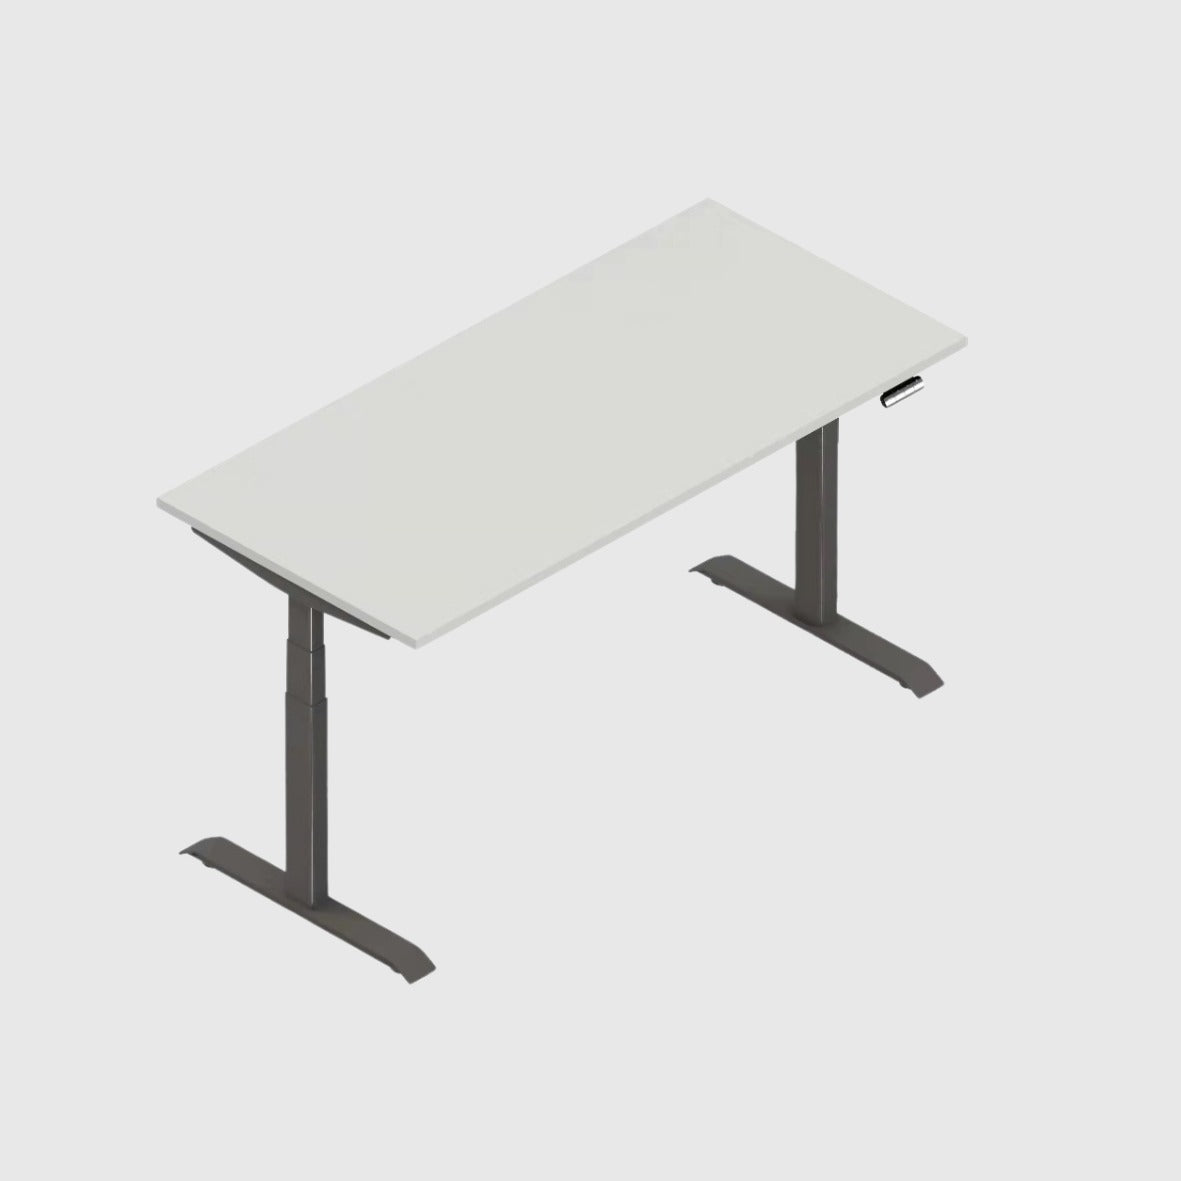 Ergonomic Height Adjustable Table White Tabletop with Grey Leg